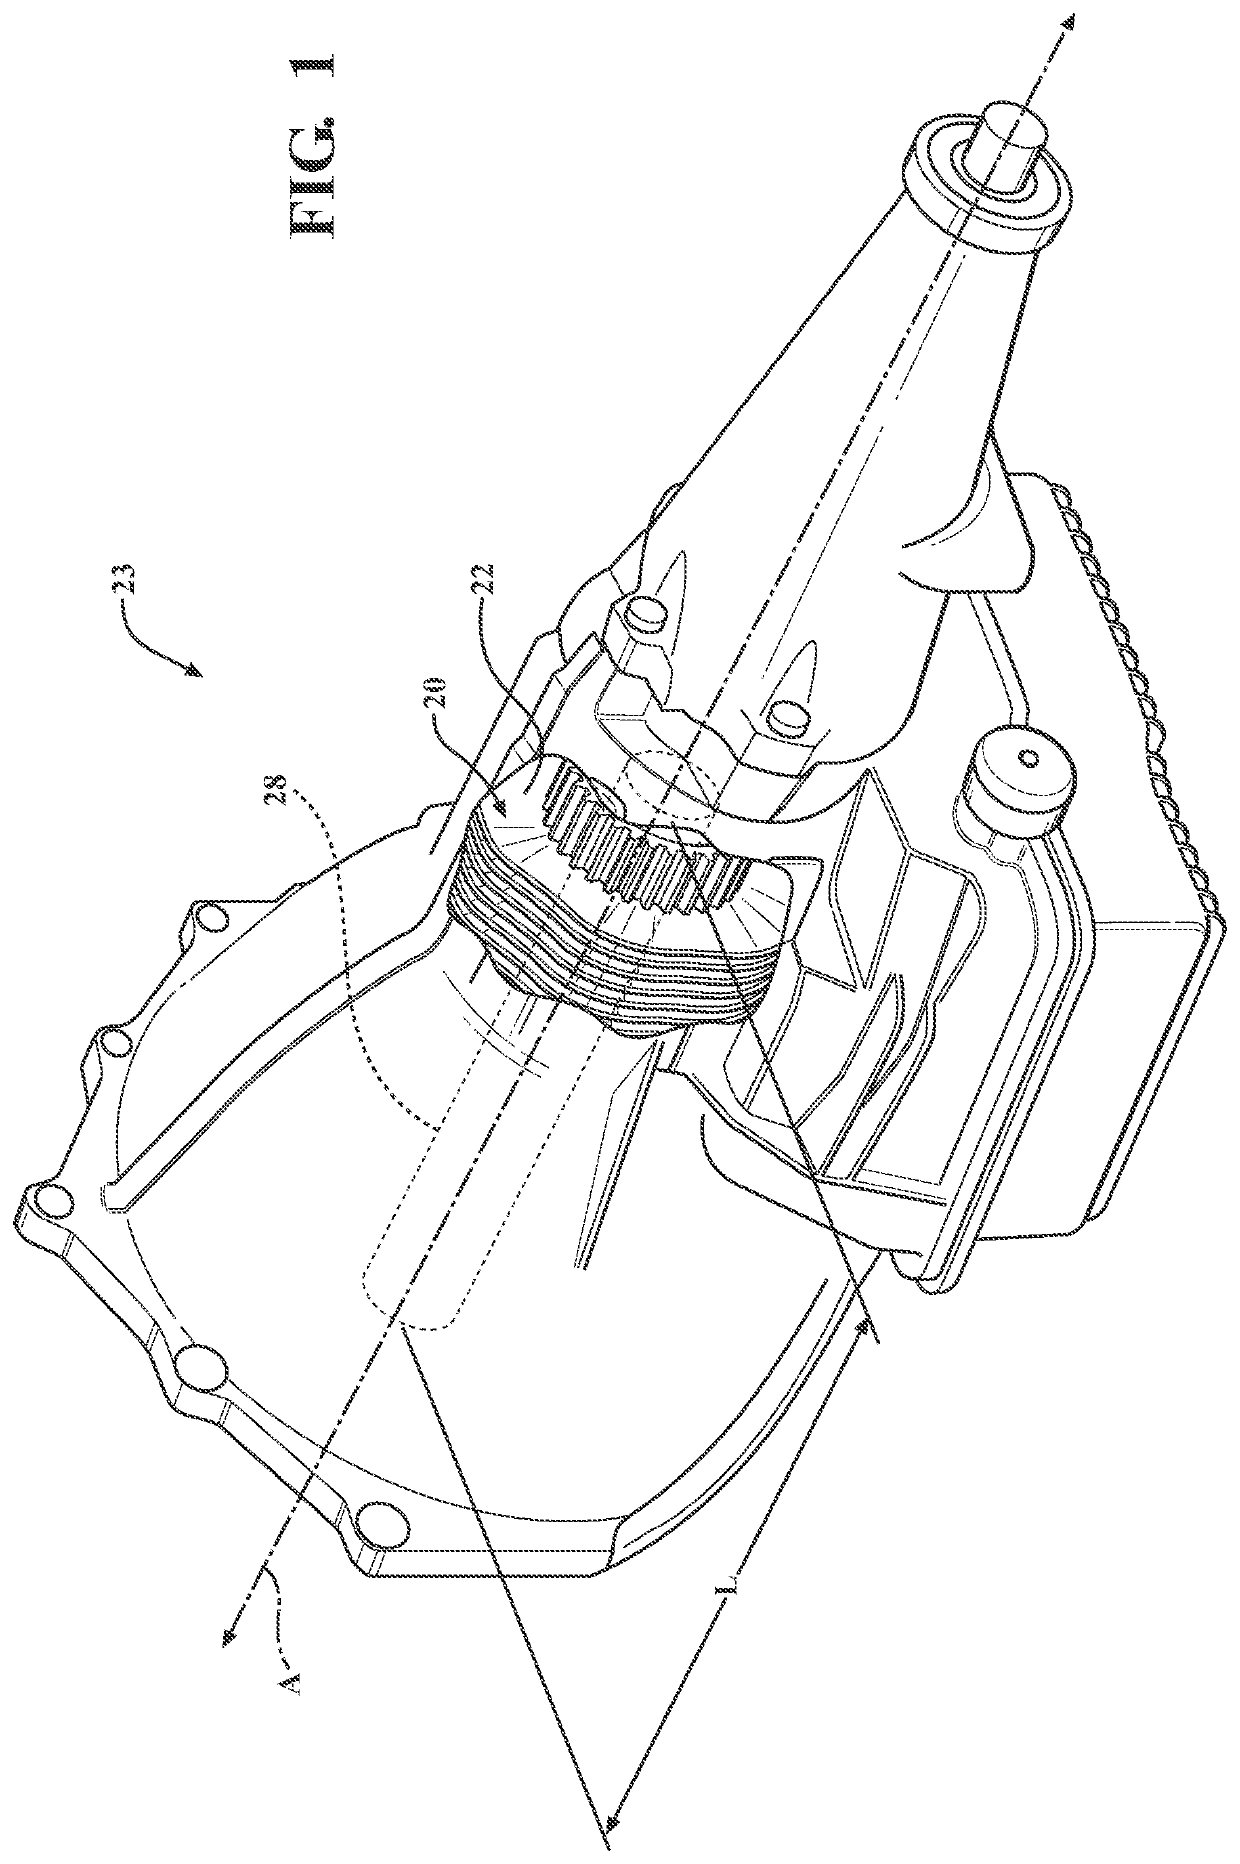 Friction plate and clutch assembly including the same